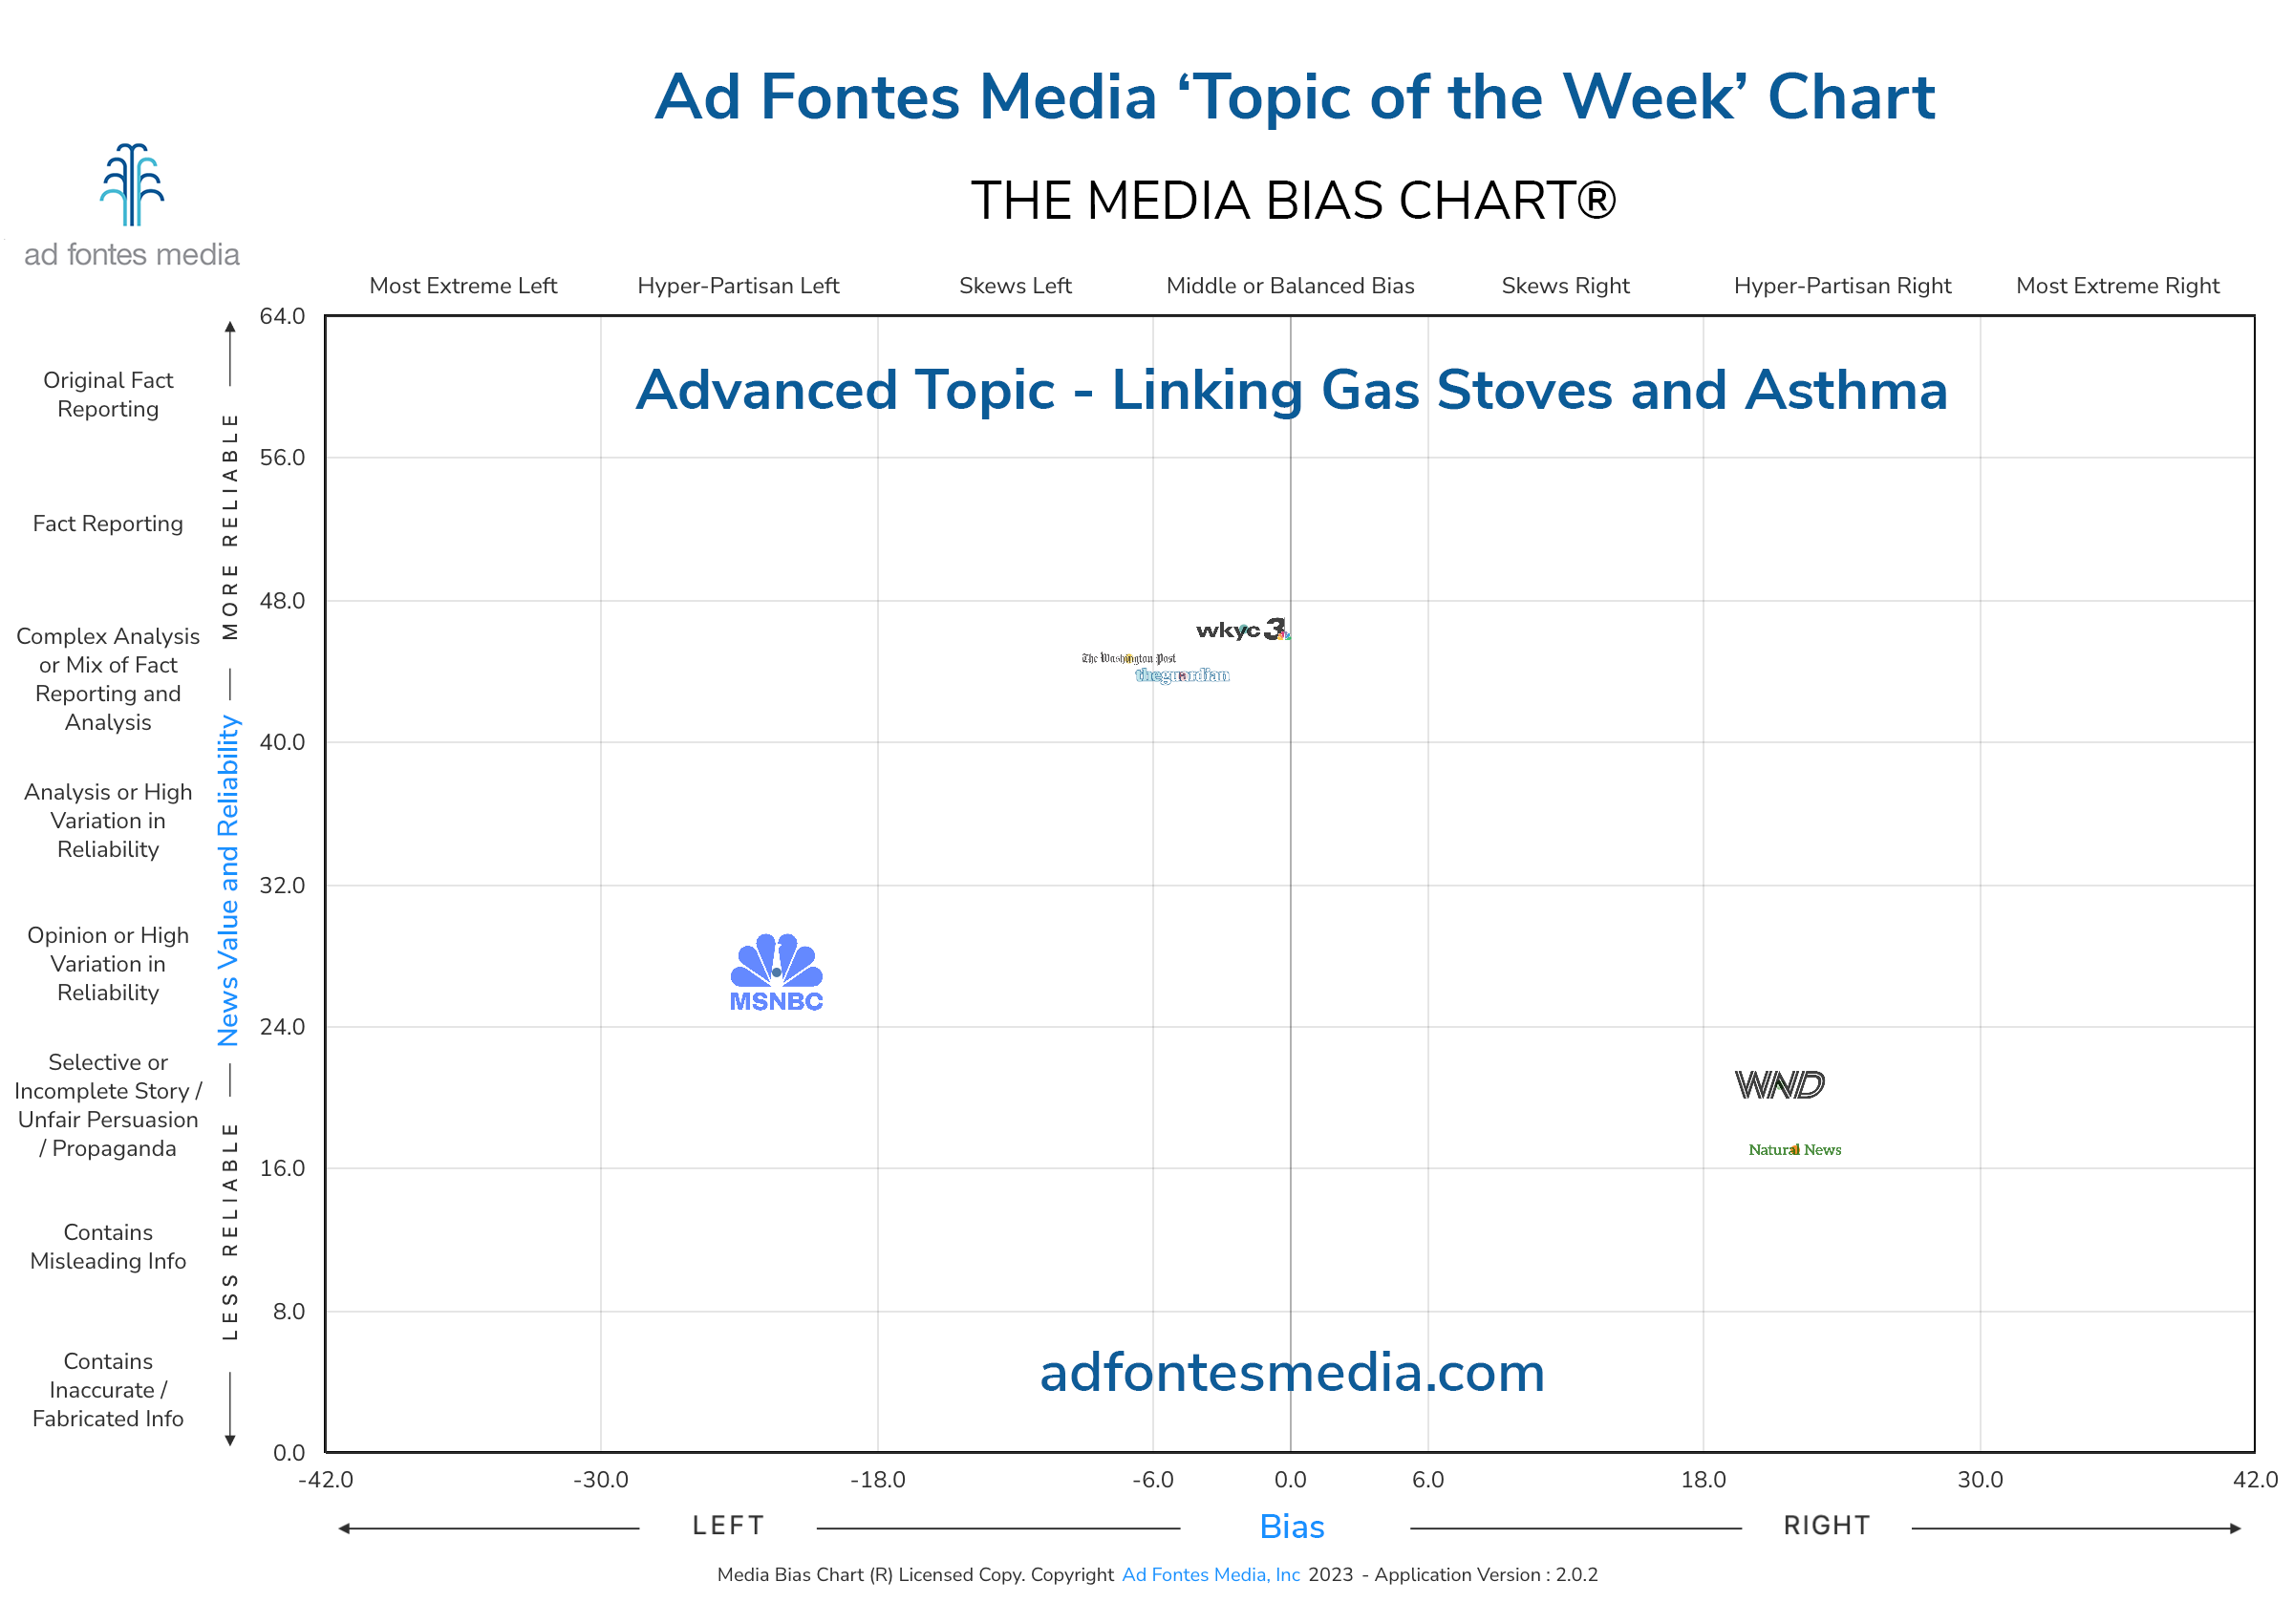 Scores of the Linking Gas Stoves and Asthma articles on the chart